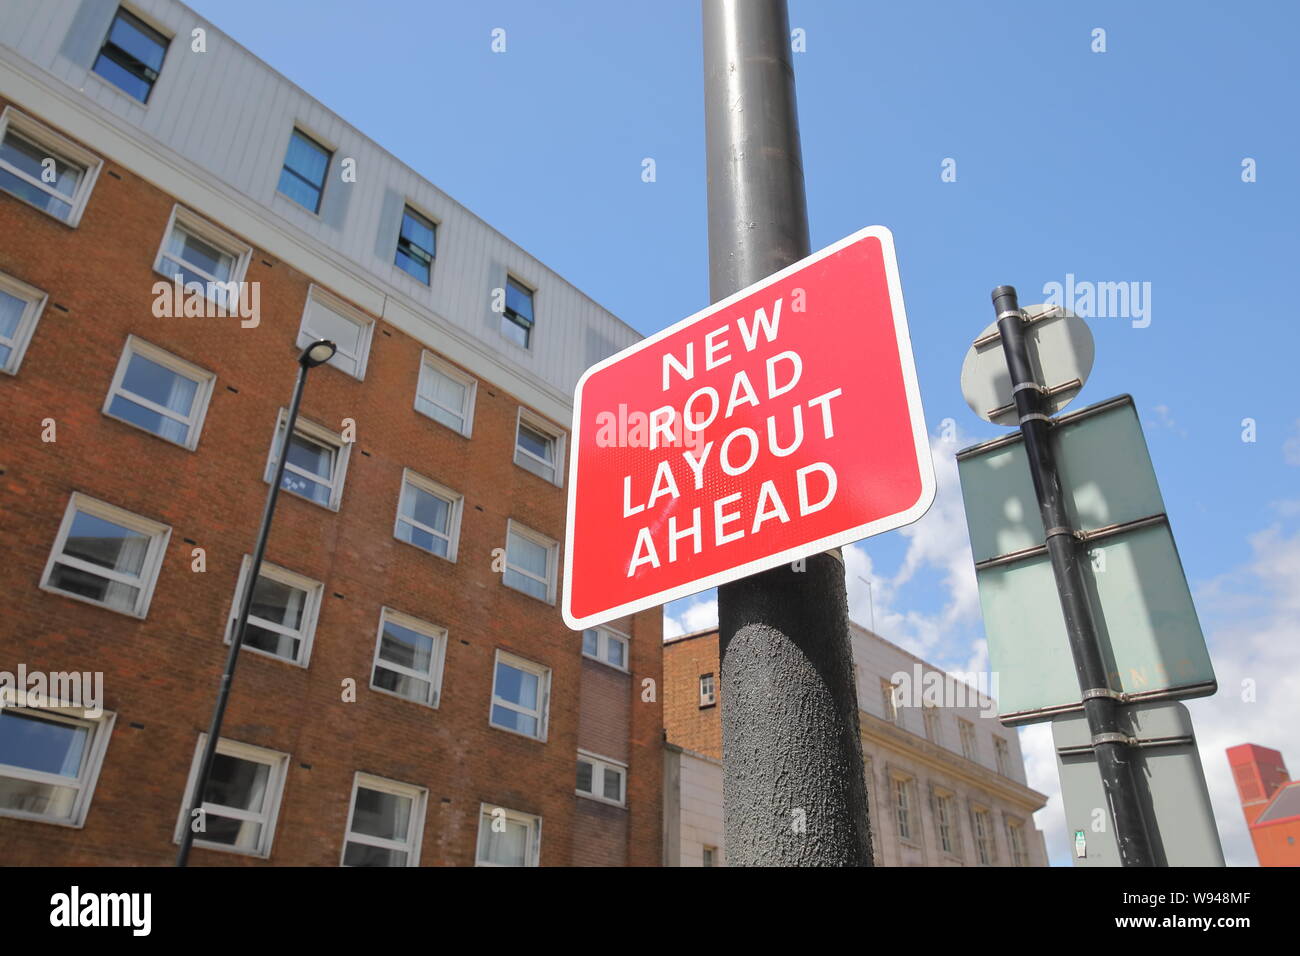 New Road Layout Ahead sign Stock Photo